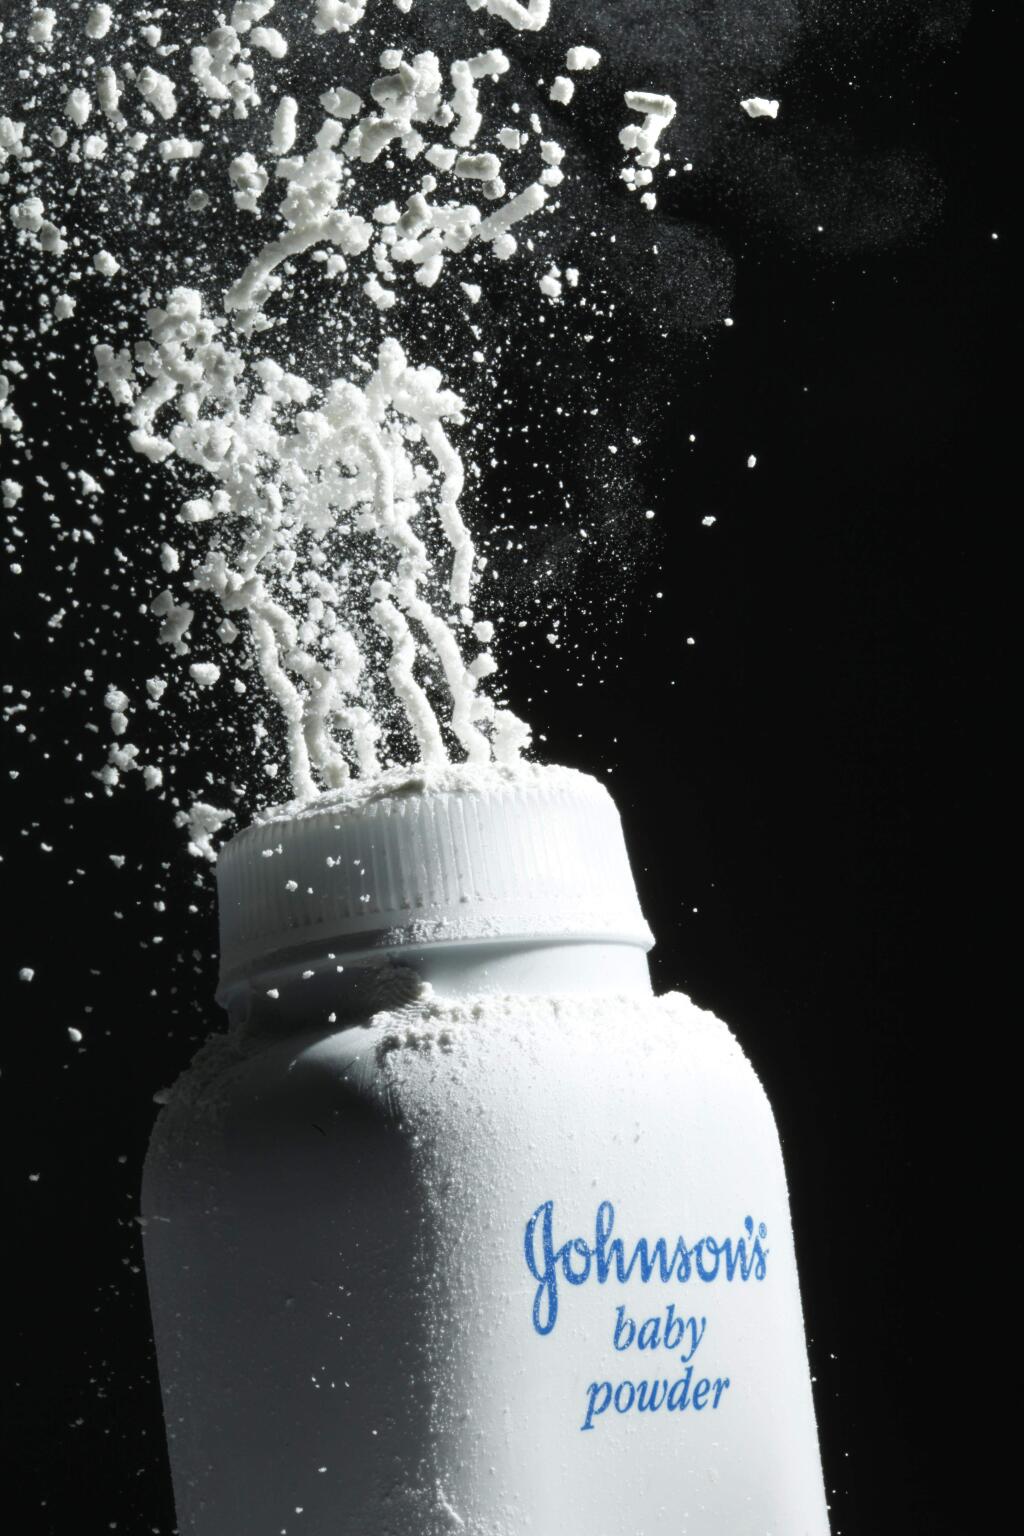 FILE - In this April 19, 2010, file photo, Johnson's baby powder is squeezed from its container. On Monday, Aug. 21, 2017, a Los Angeles County Superior Court spokeswoman confirmed that a jury has ordered Johnson & Johnson to pay $417 million in a case to a woman who claimed in a lawsuit that the talc in the company's iconic baby powder causes ovarian cancer when applied regularly for feminine hygiene. (AP Photo/Matt Rourke, File)